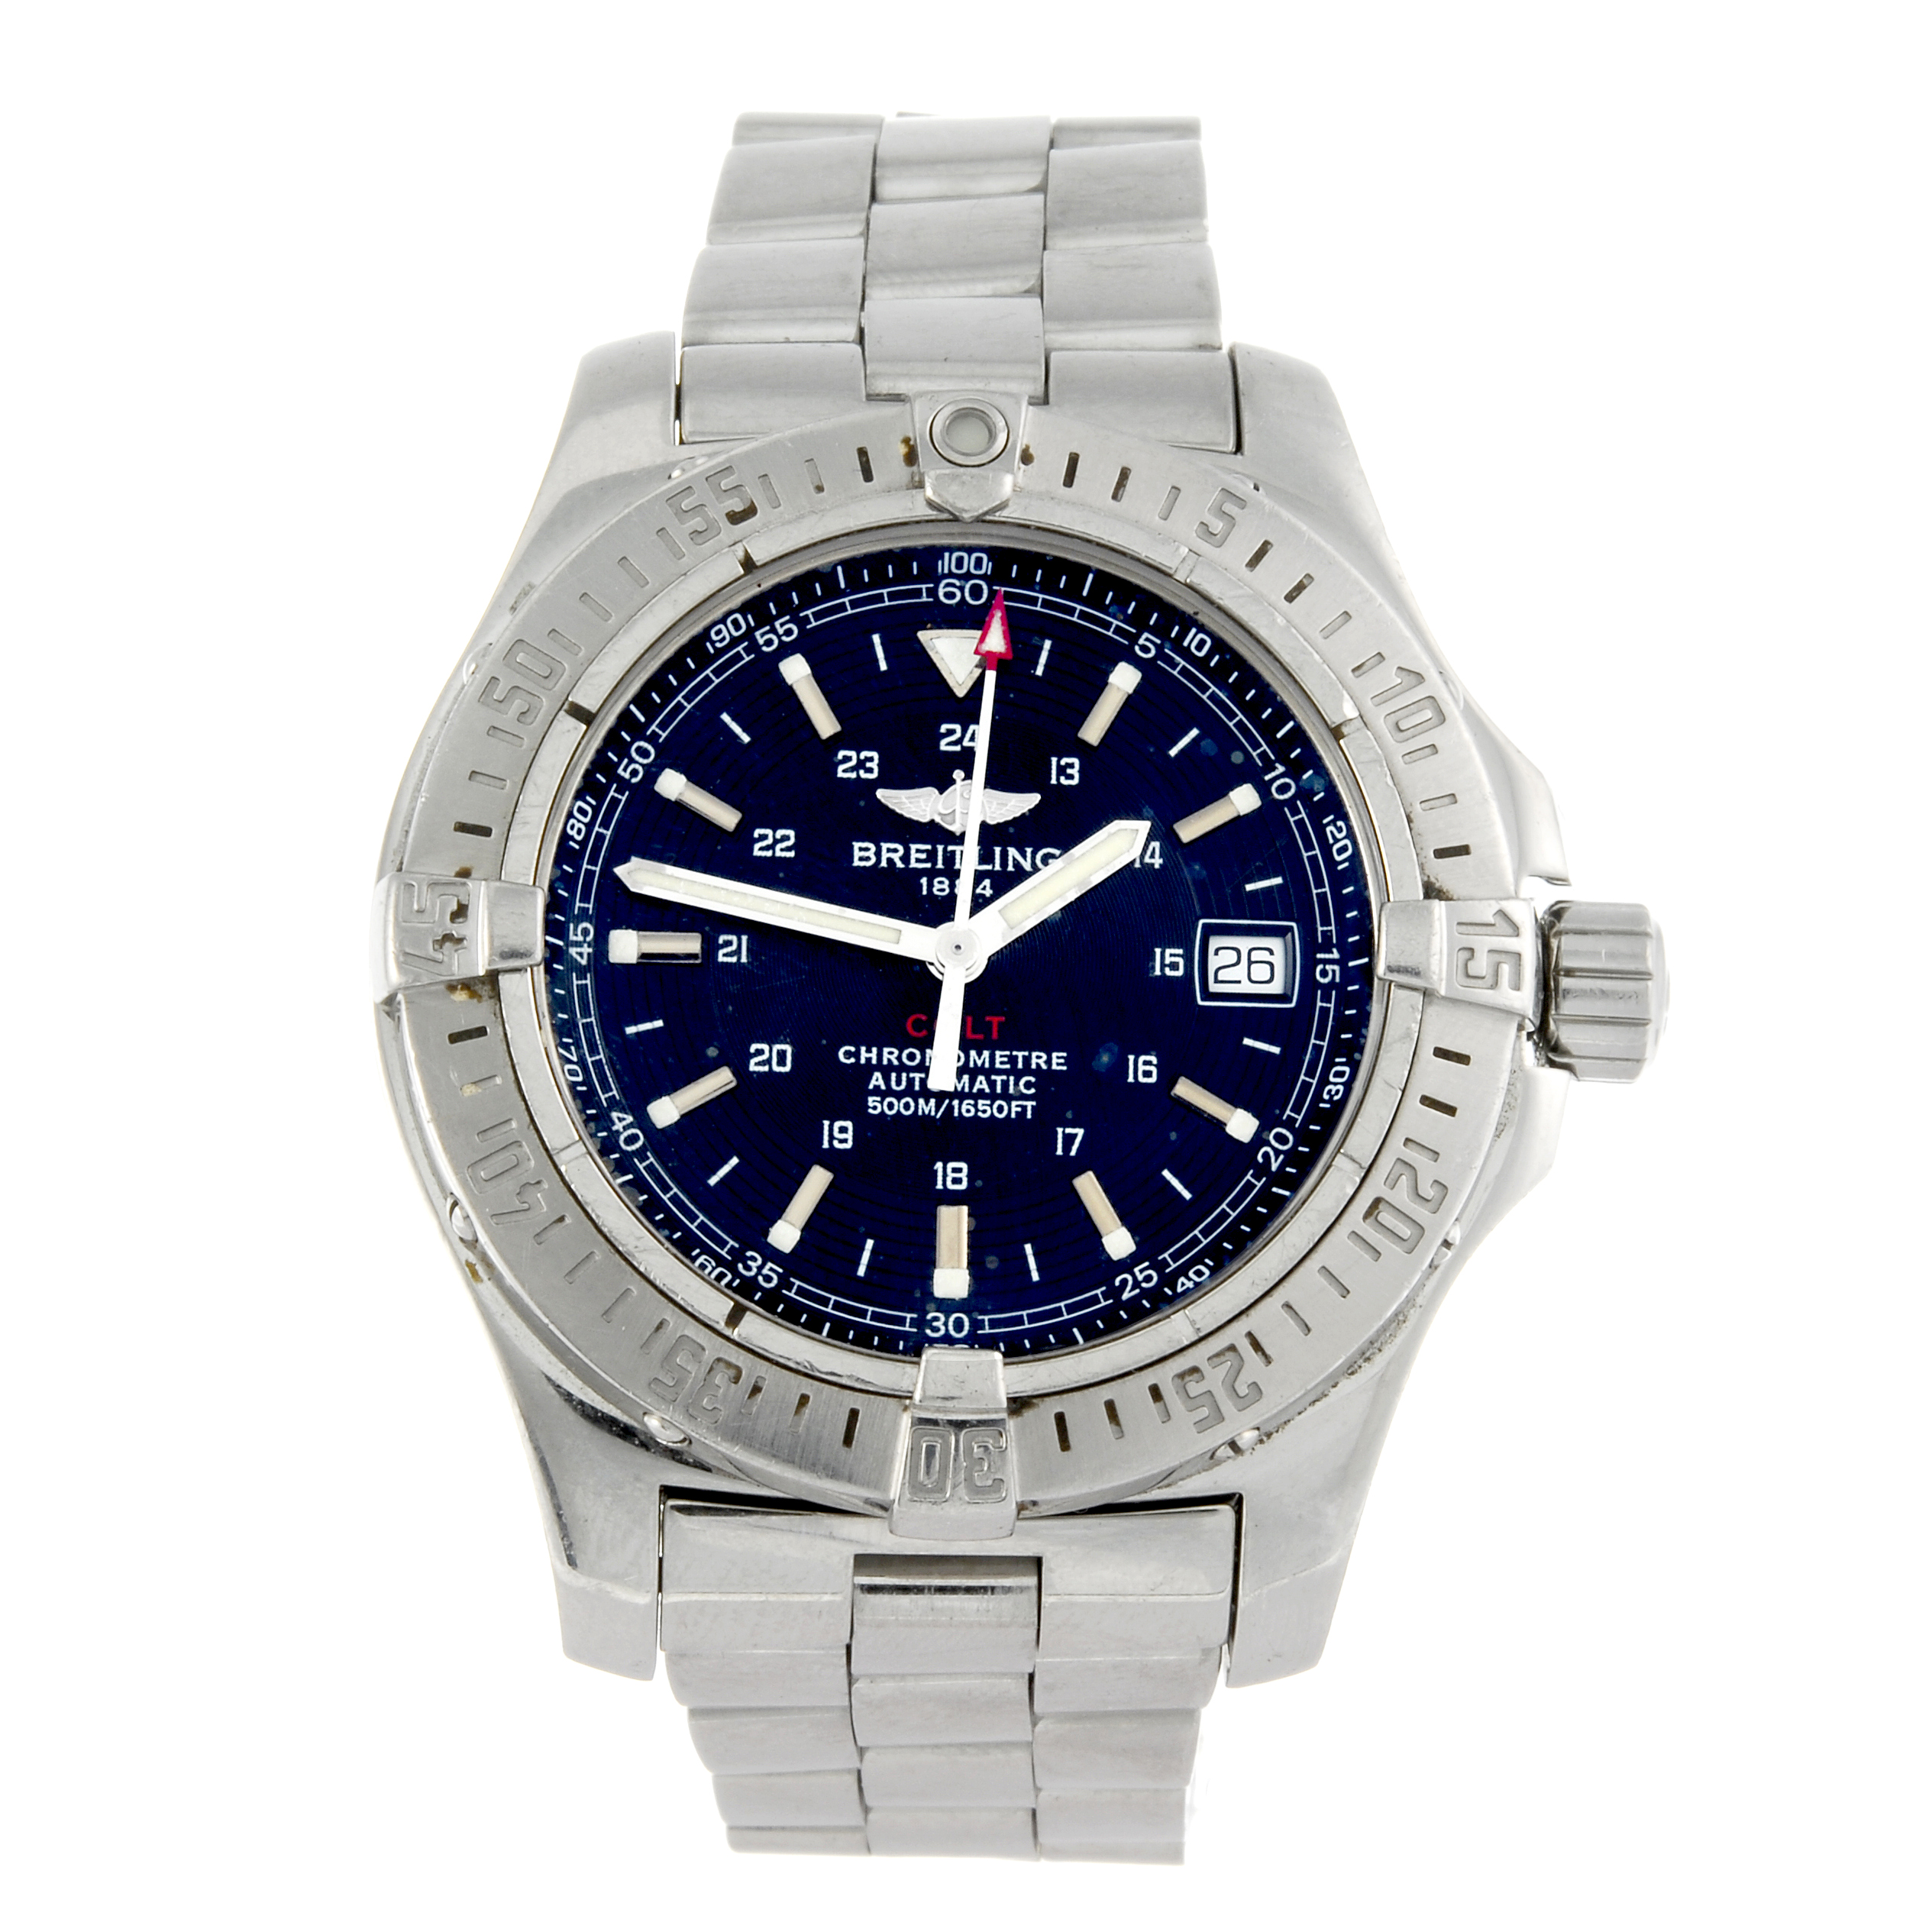 BREITLING - a gentleman's Colt bracelet watch. Stainless steel case with calibrated bezel. Reference